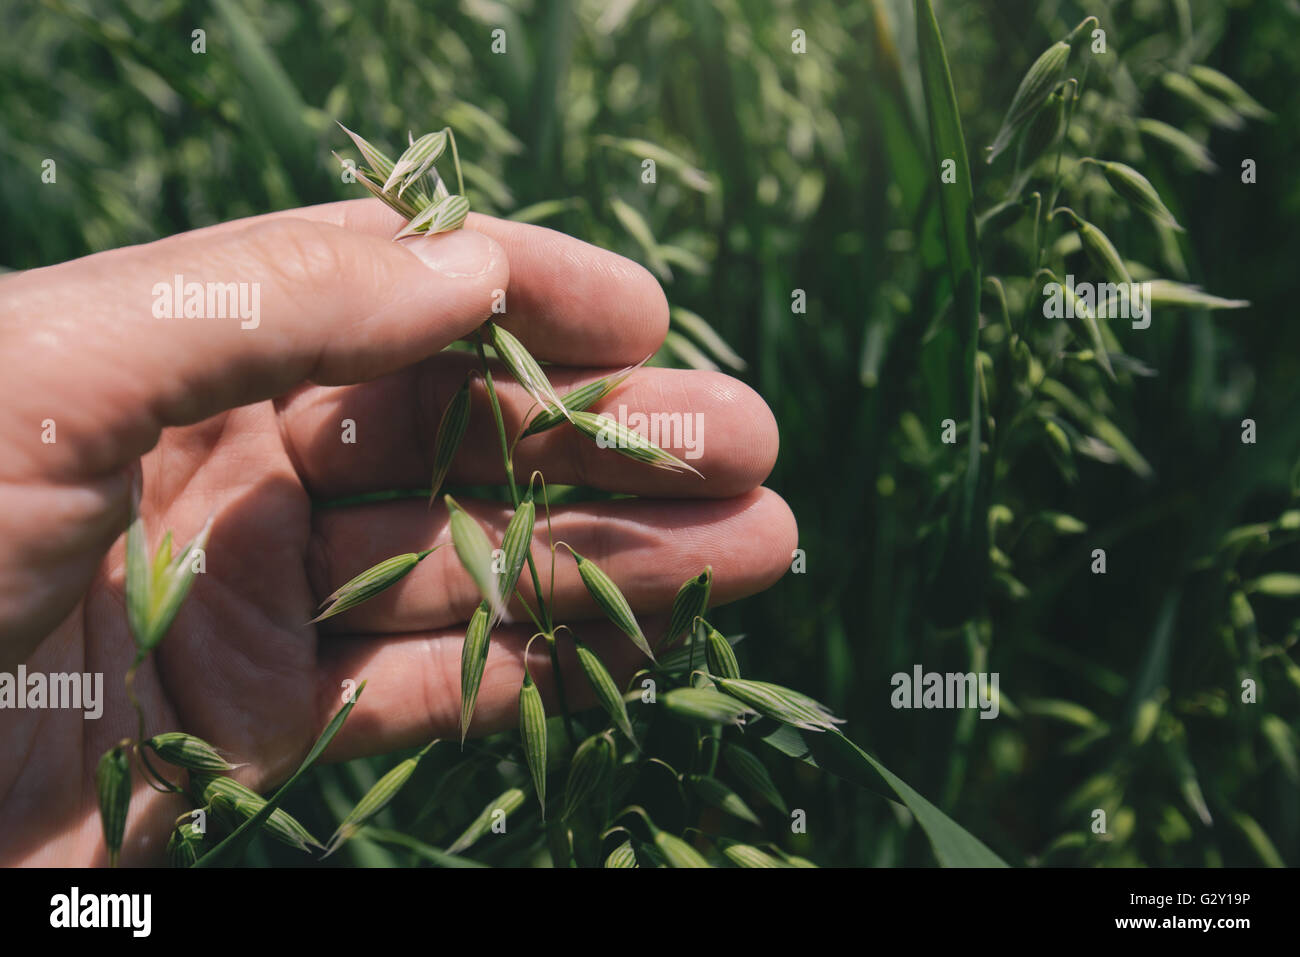 Farmer examining oat crops in field, close up of hand holding green plant Stock Photo